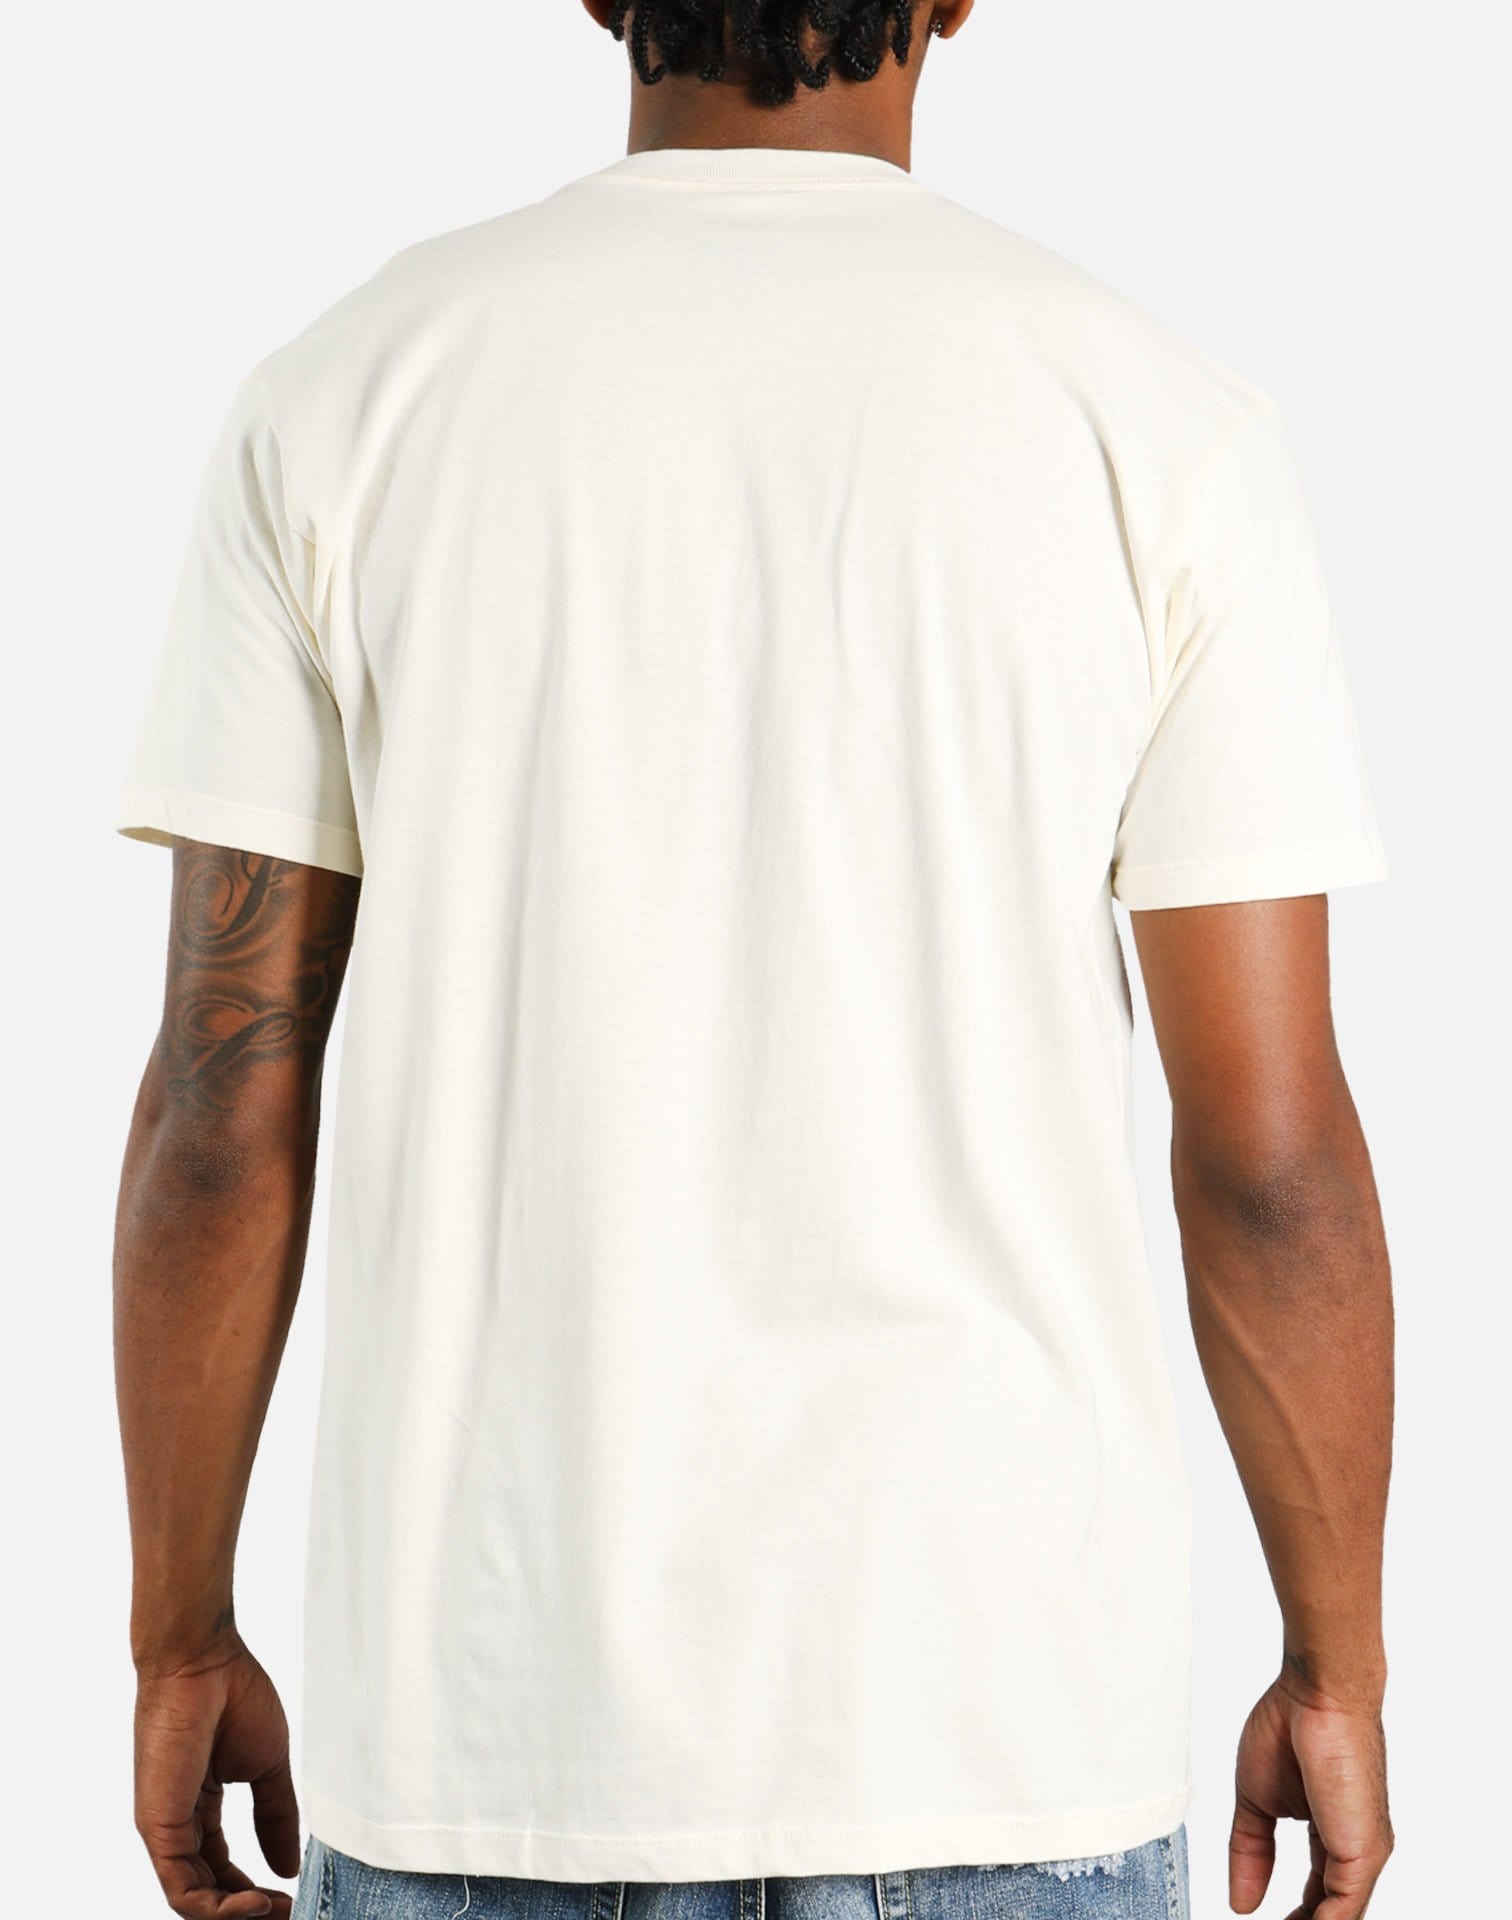 Outrank Stay Cool Tee (Cream)